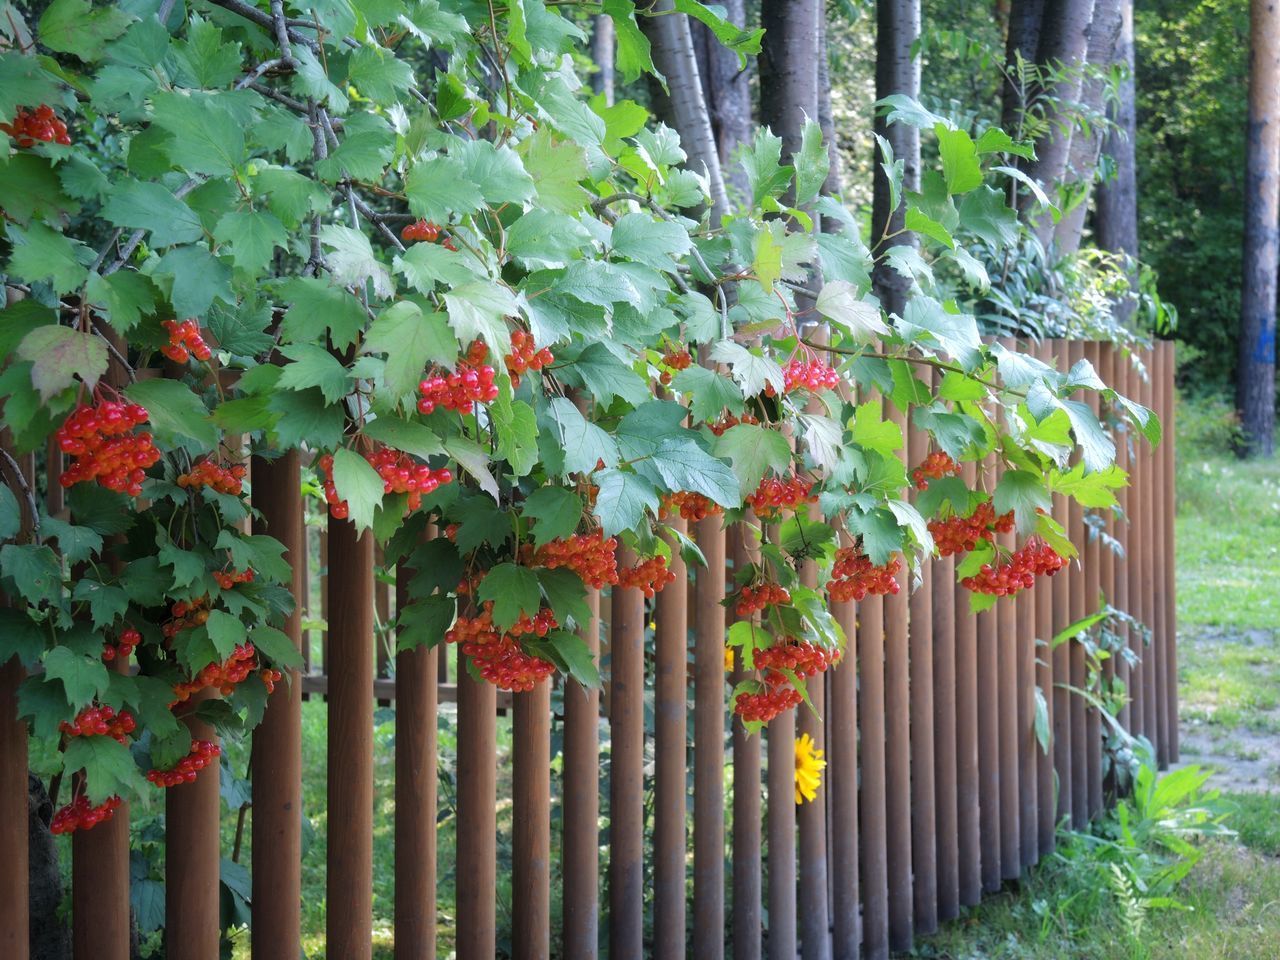 CLOSE-UP OF FLOWERING PLANTS ON FENCE